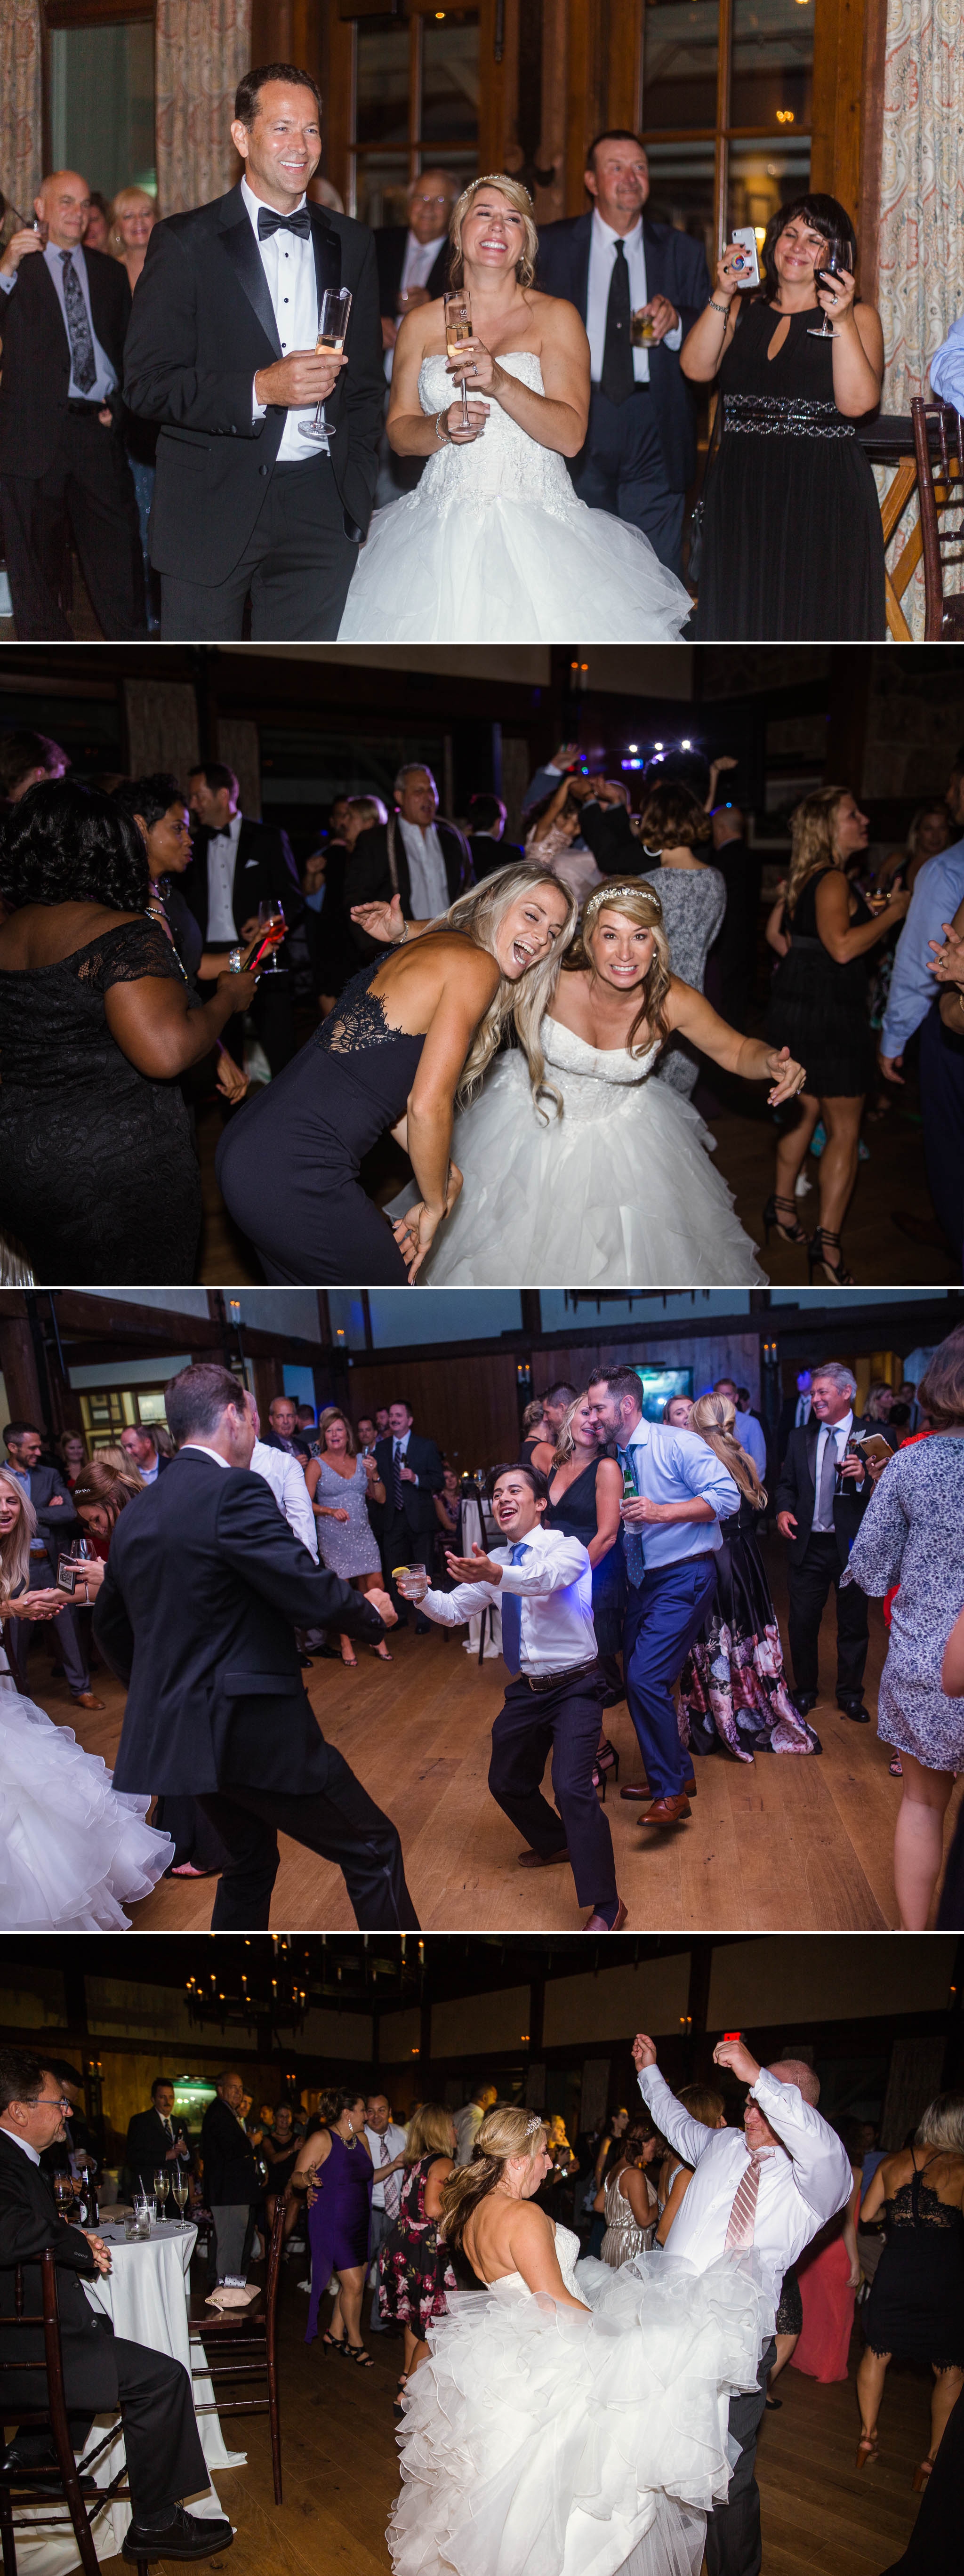 Reception - Dona + Doug - MacGregor Downs Country Club in Cary, NC - Raleigh Wedding Photographer